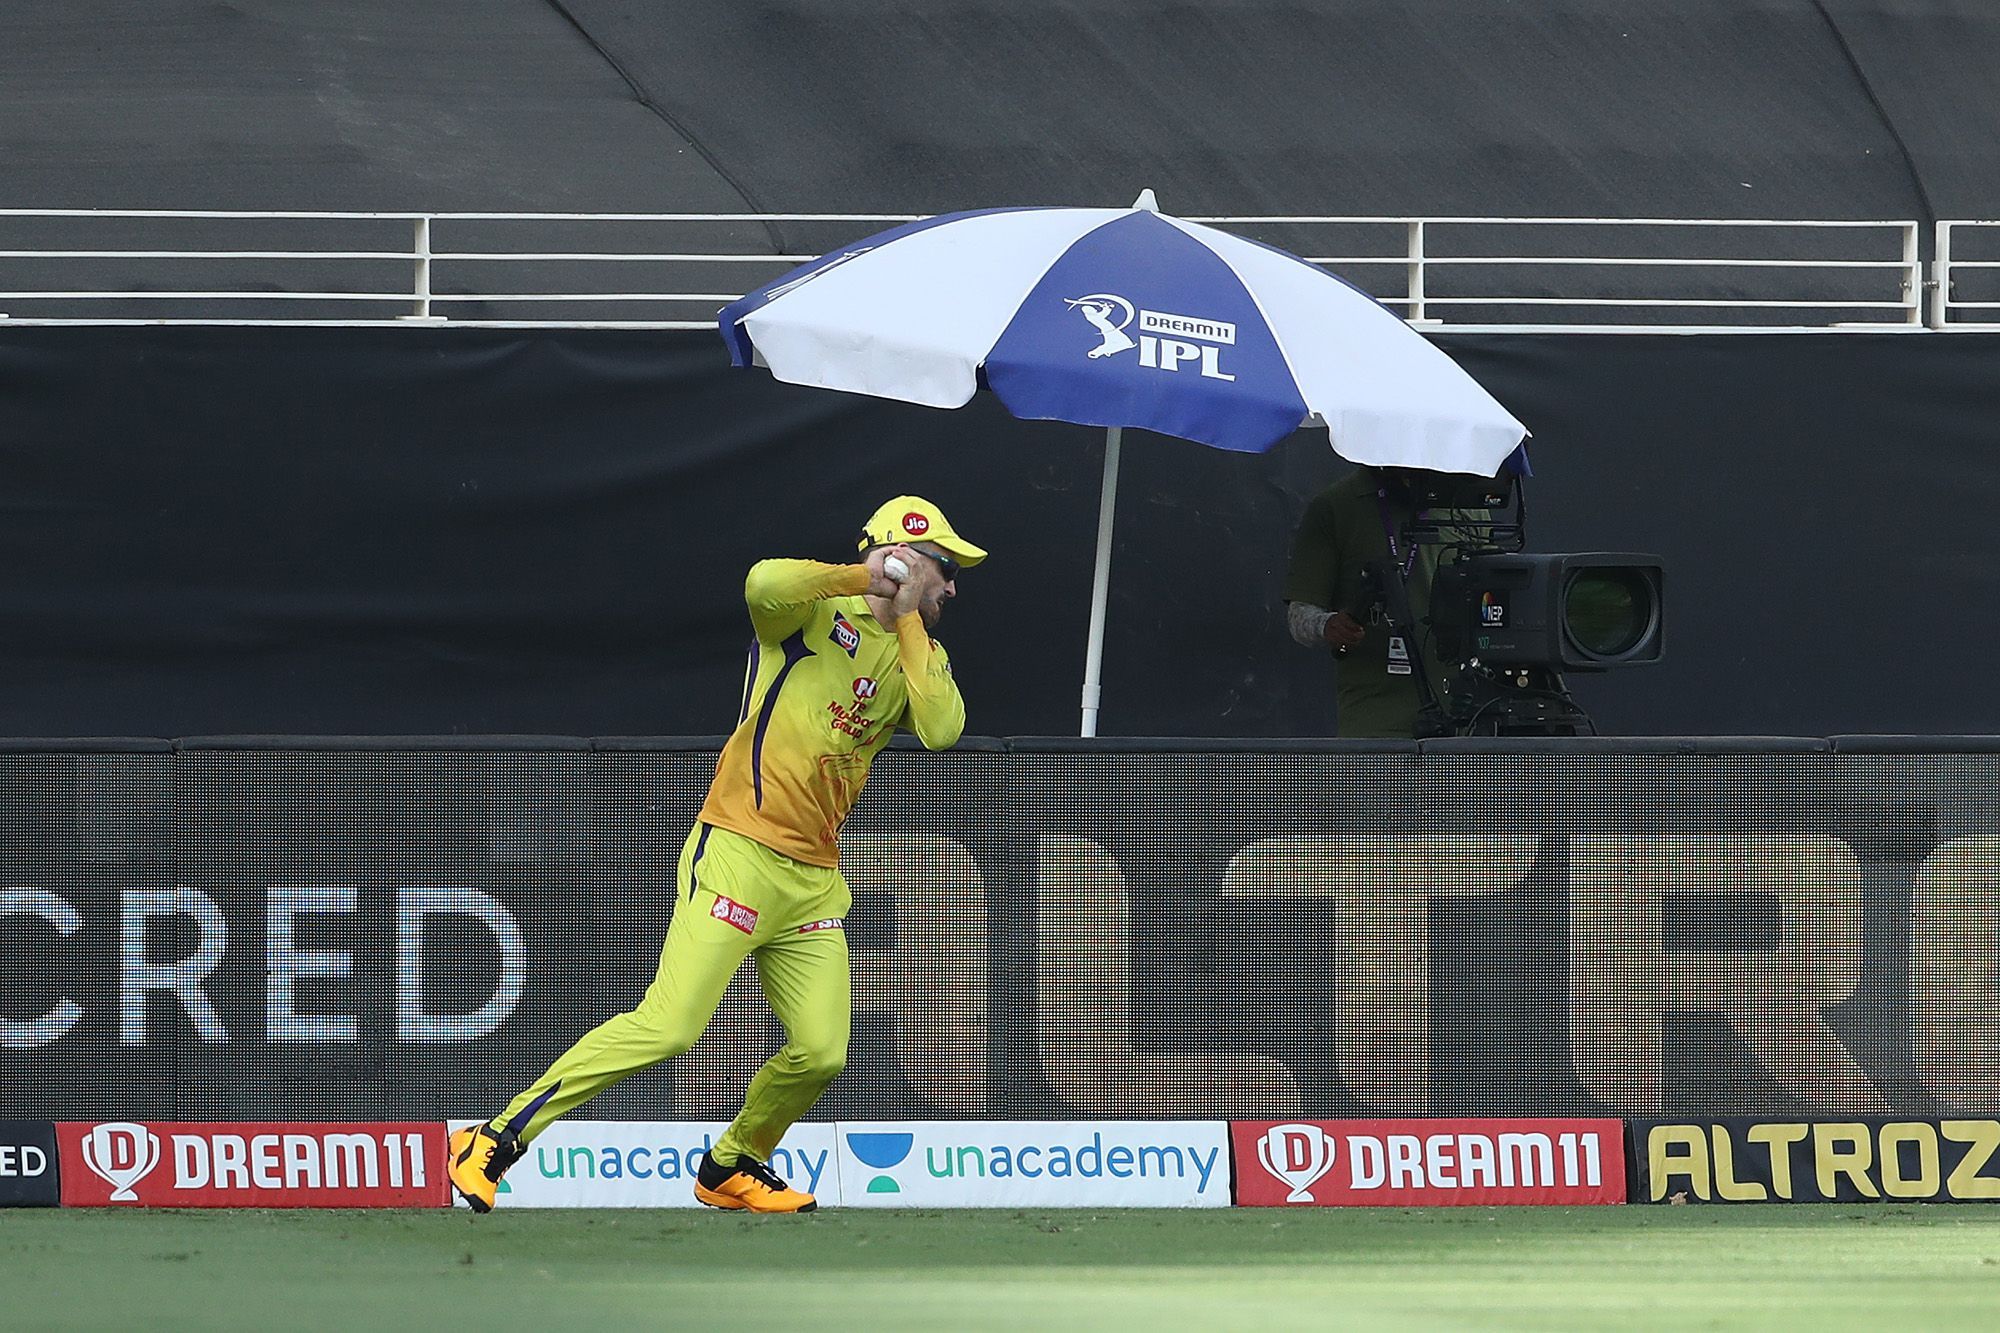 Faf du Plessis took two stunning catches today.